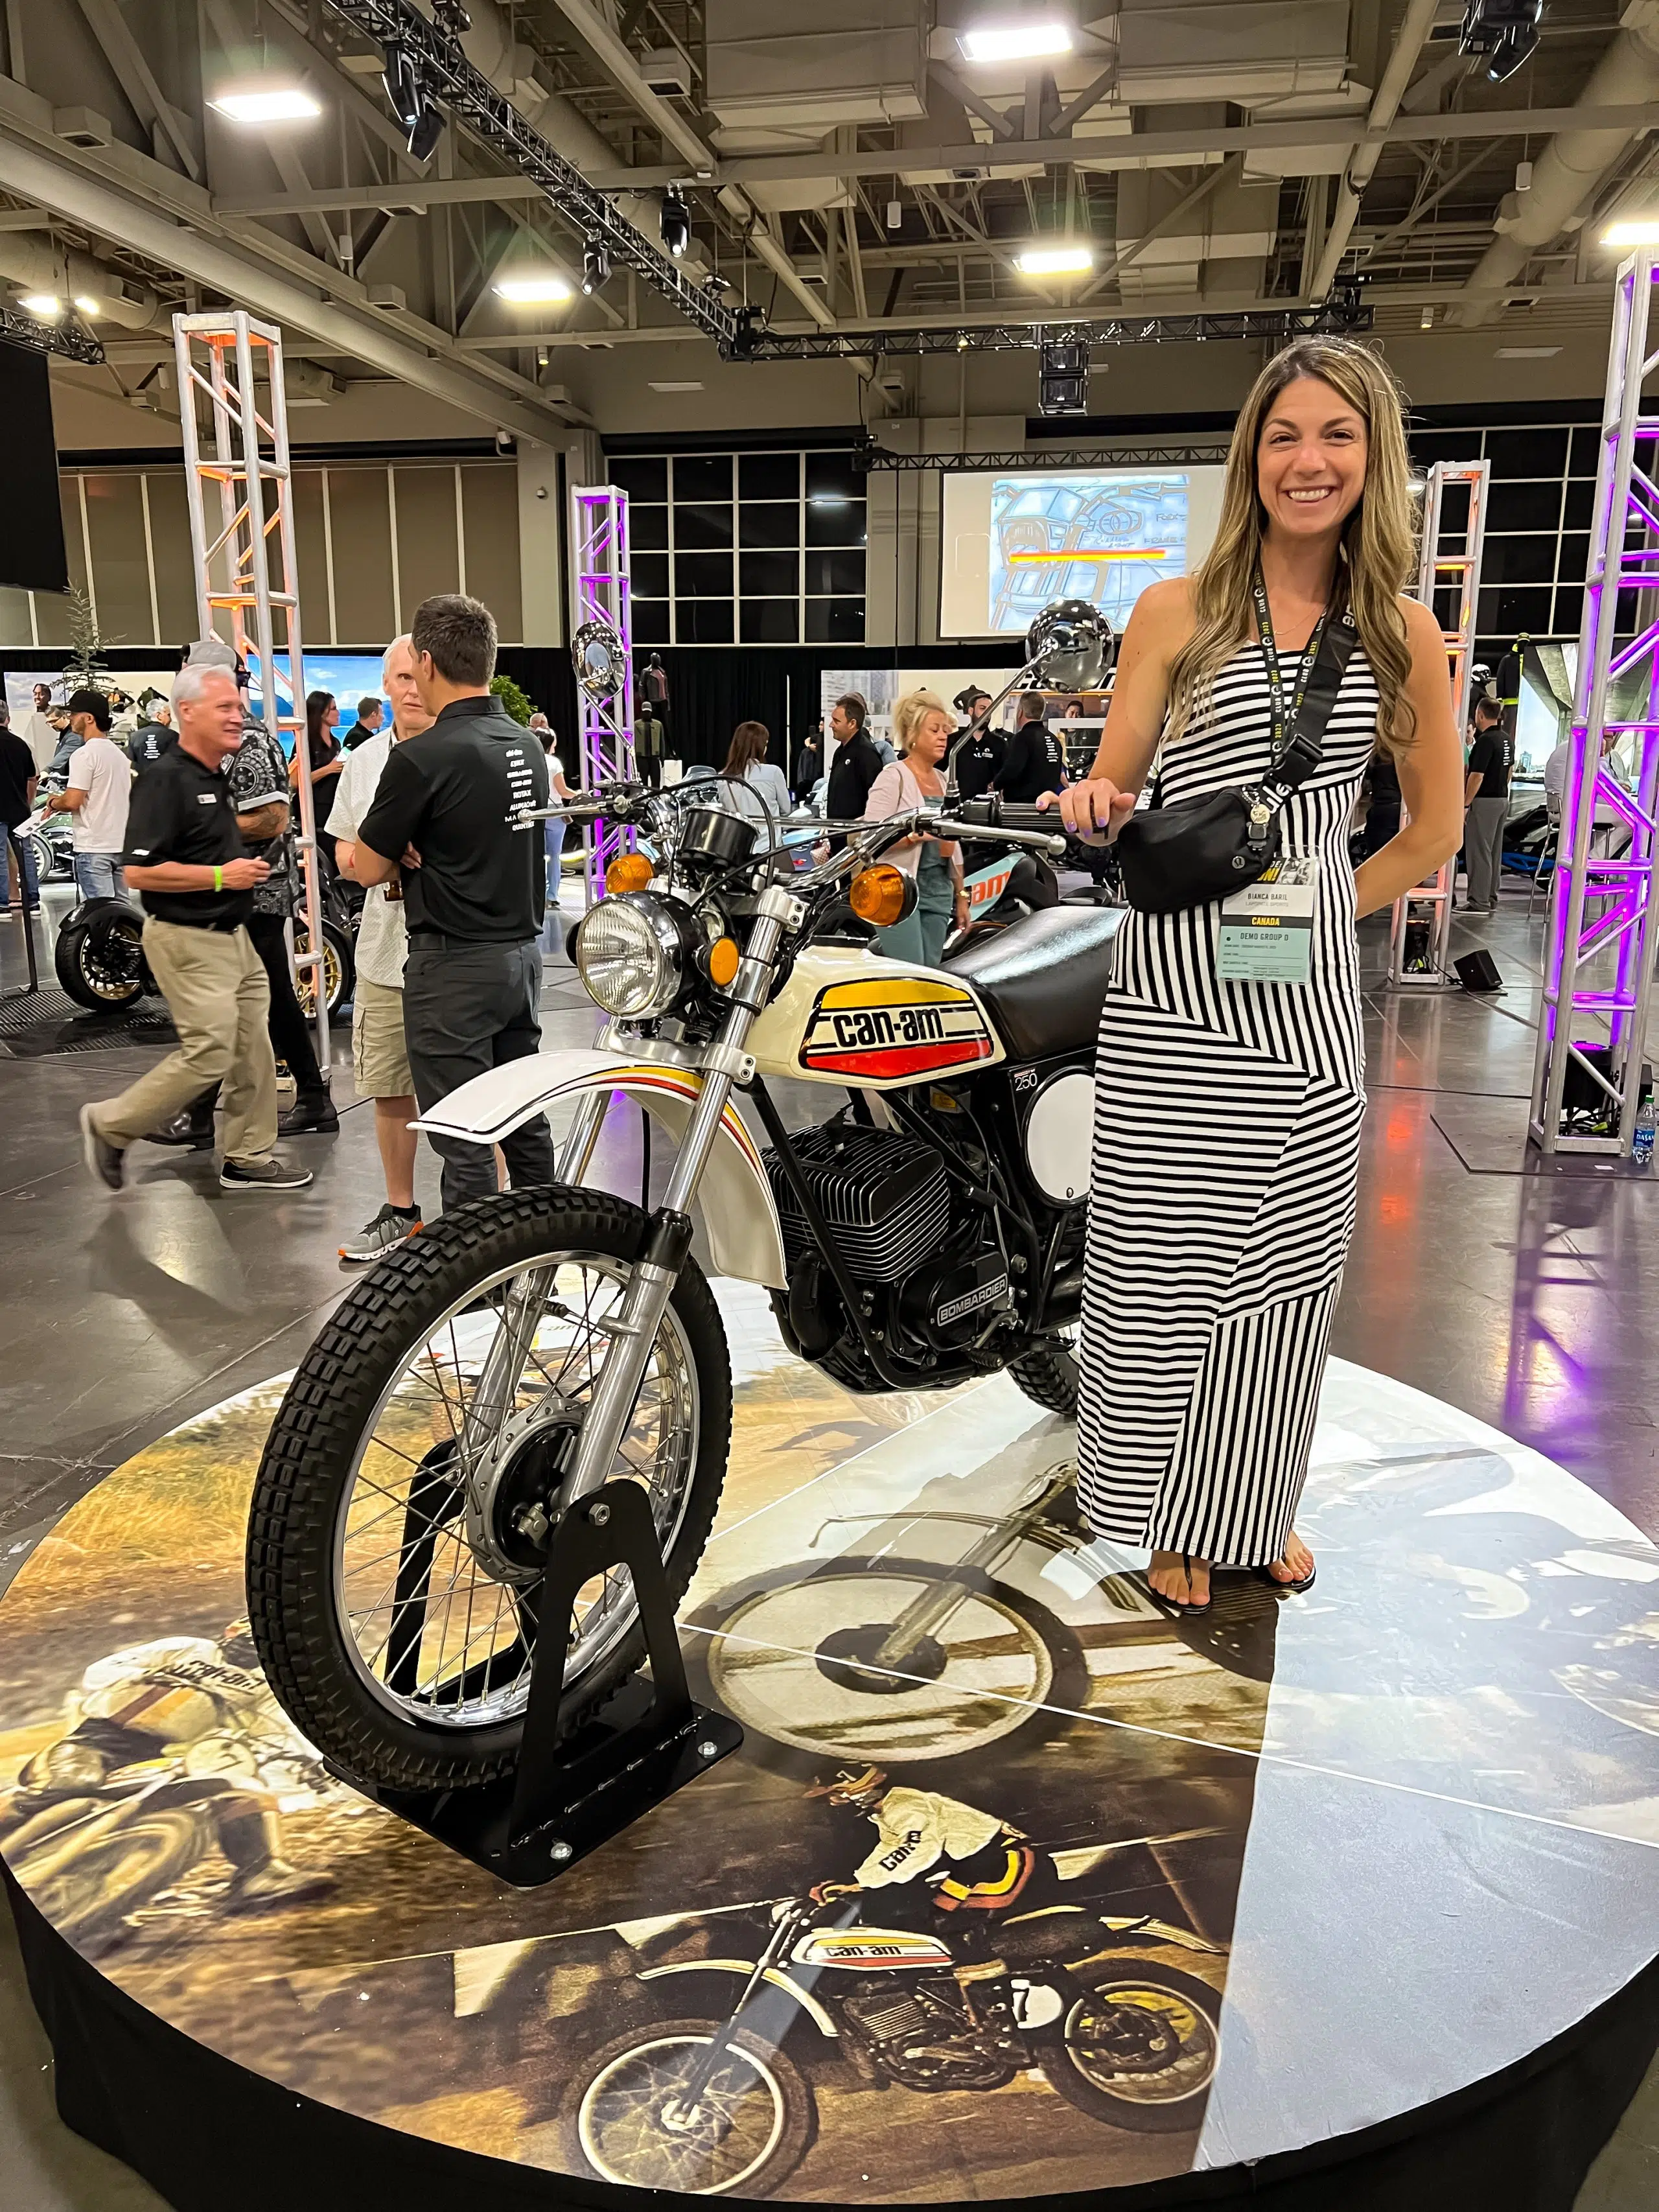 Bianca B. and the legendary Can-Am two-wheel motorcycle from the seventies, during the big Can-Am 2022 unveiling last summer. photo credit: @bianca.baril